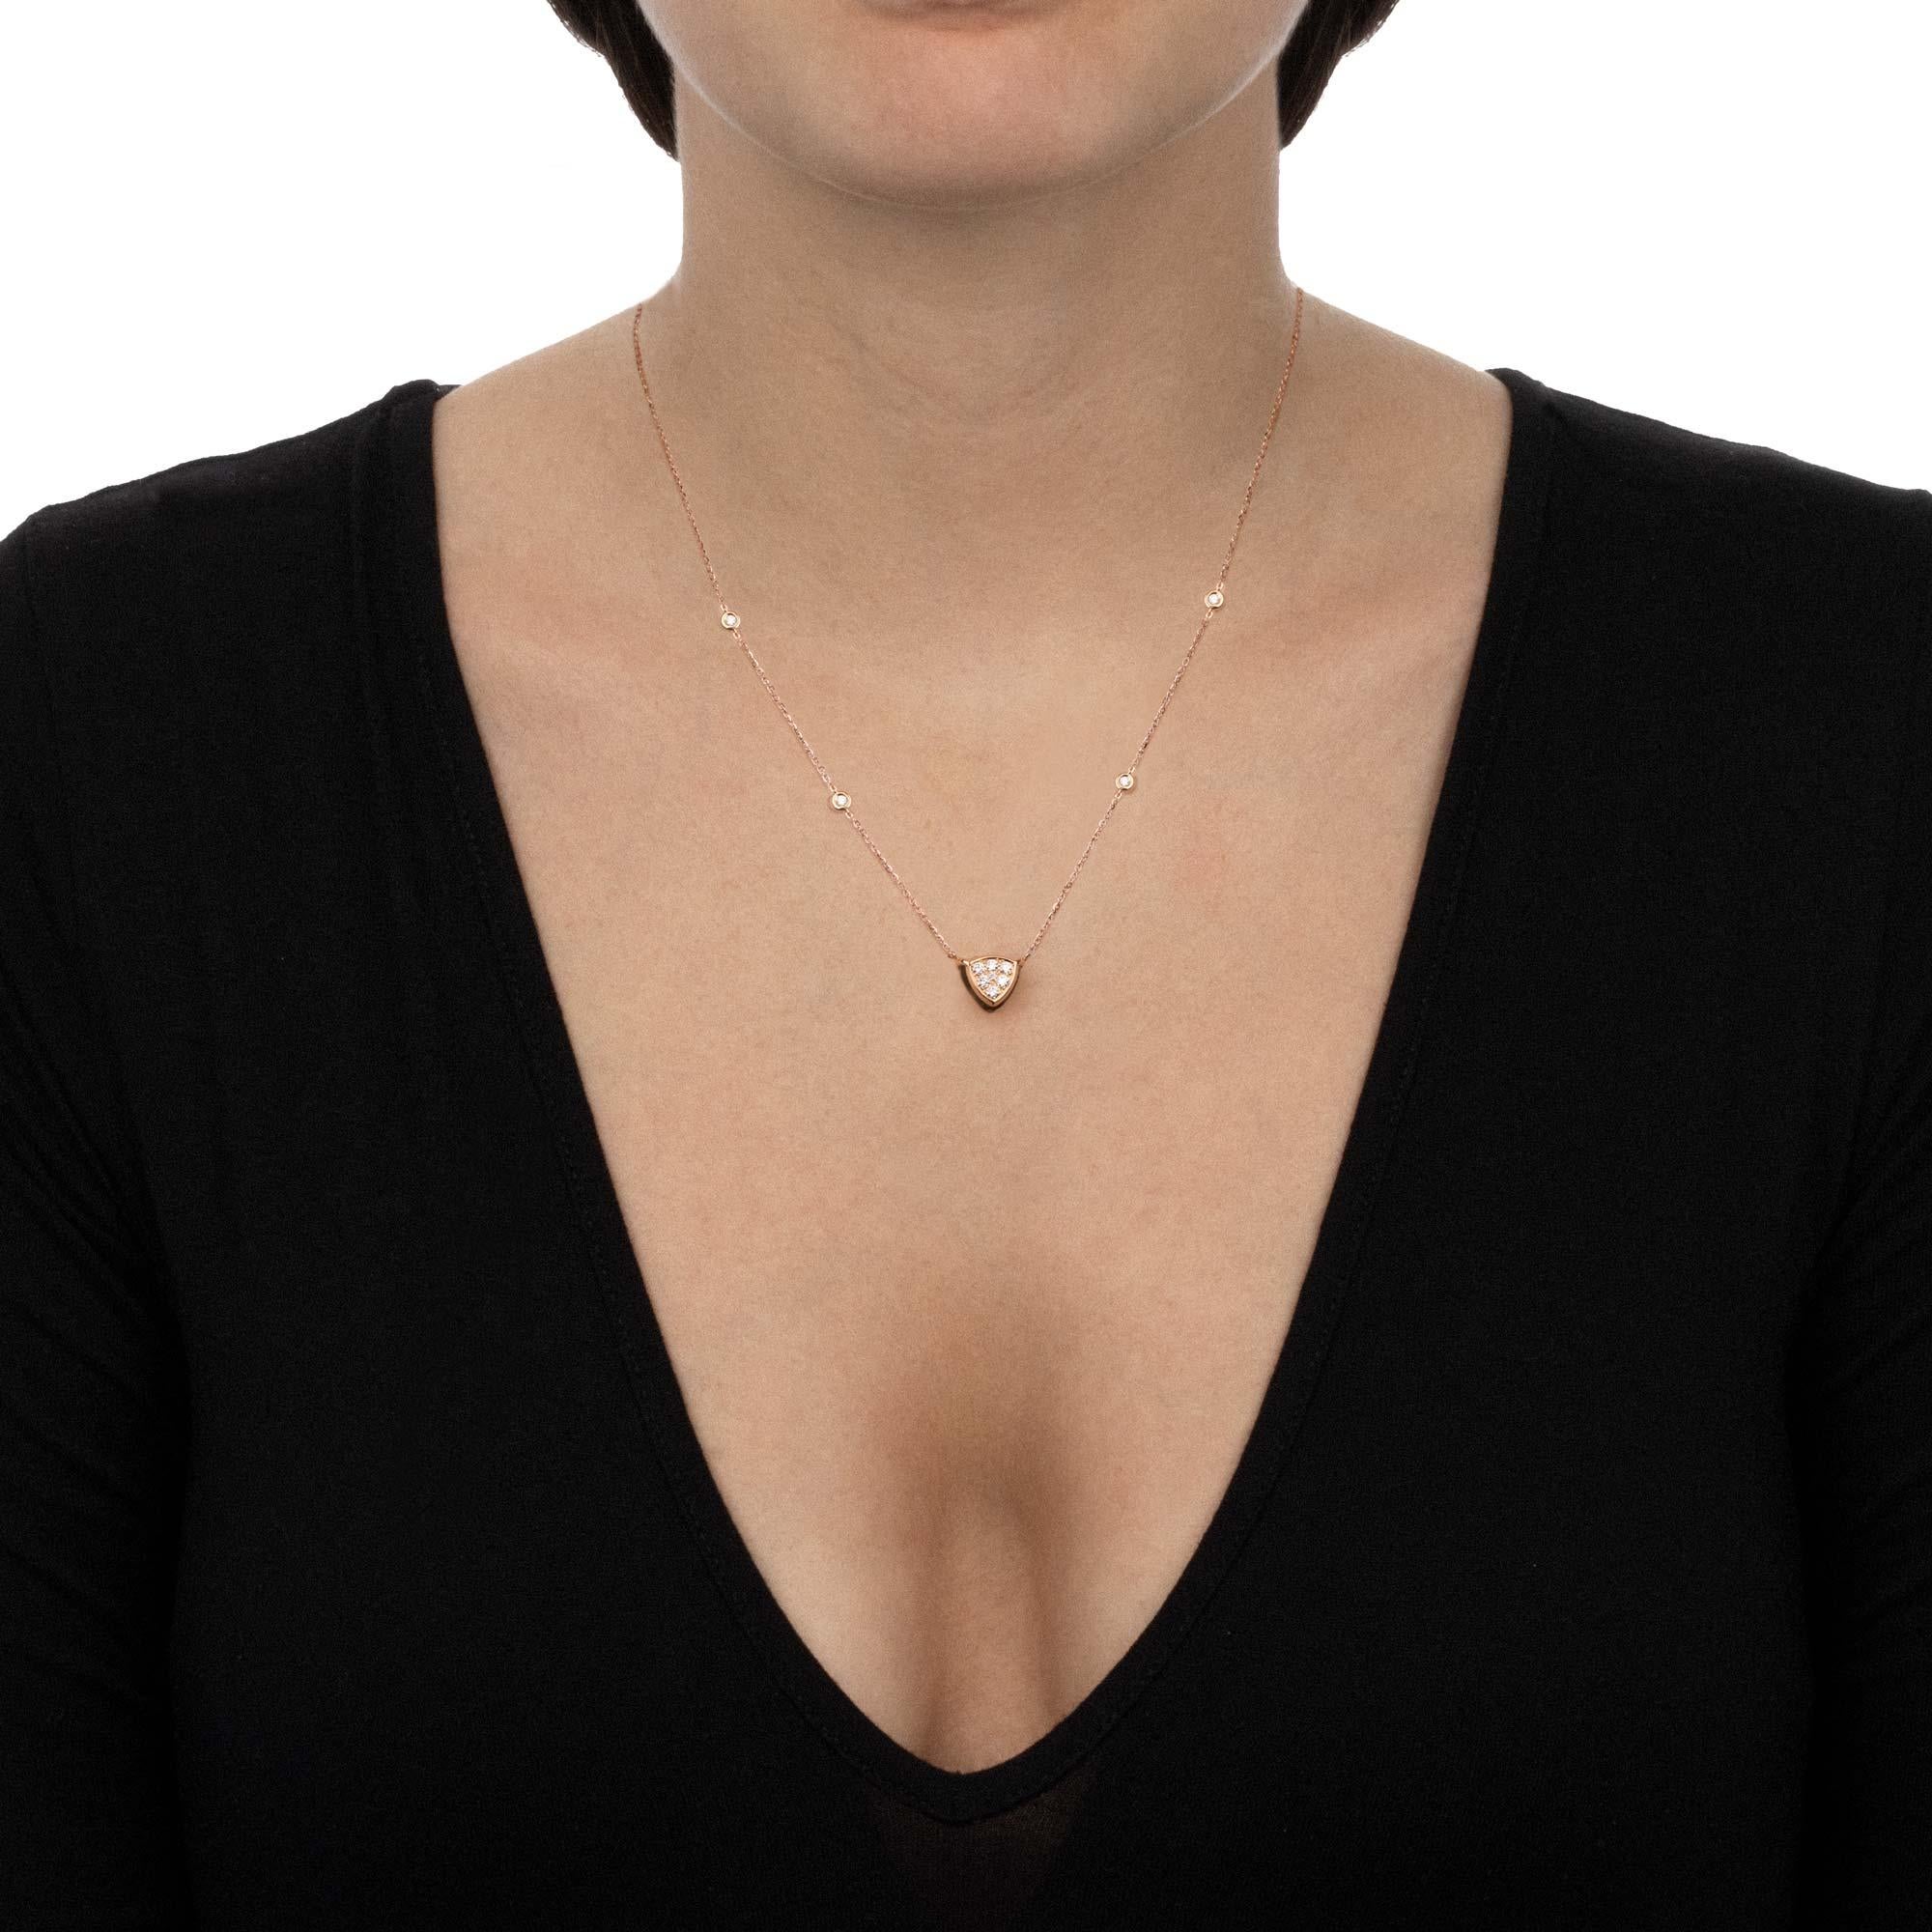 Central element of this jewel is the smoky quartz triangle that raise shiny diamonds. The rose gold enhances the color contrasts for a fresh and modern design.

Necklace length 43 cm with extension at 45 cm and 48 cm, rose gold diamond chain,